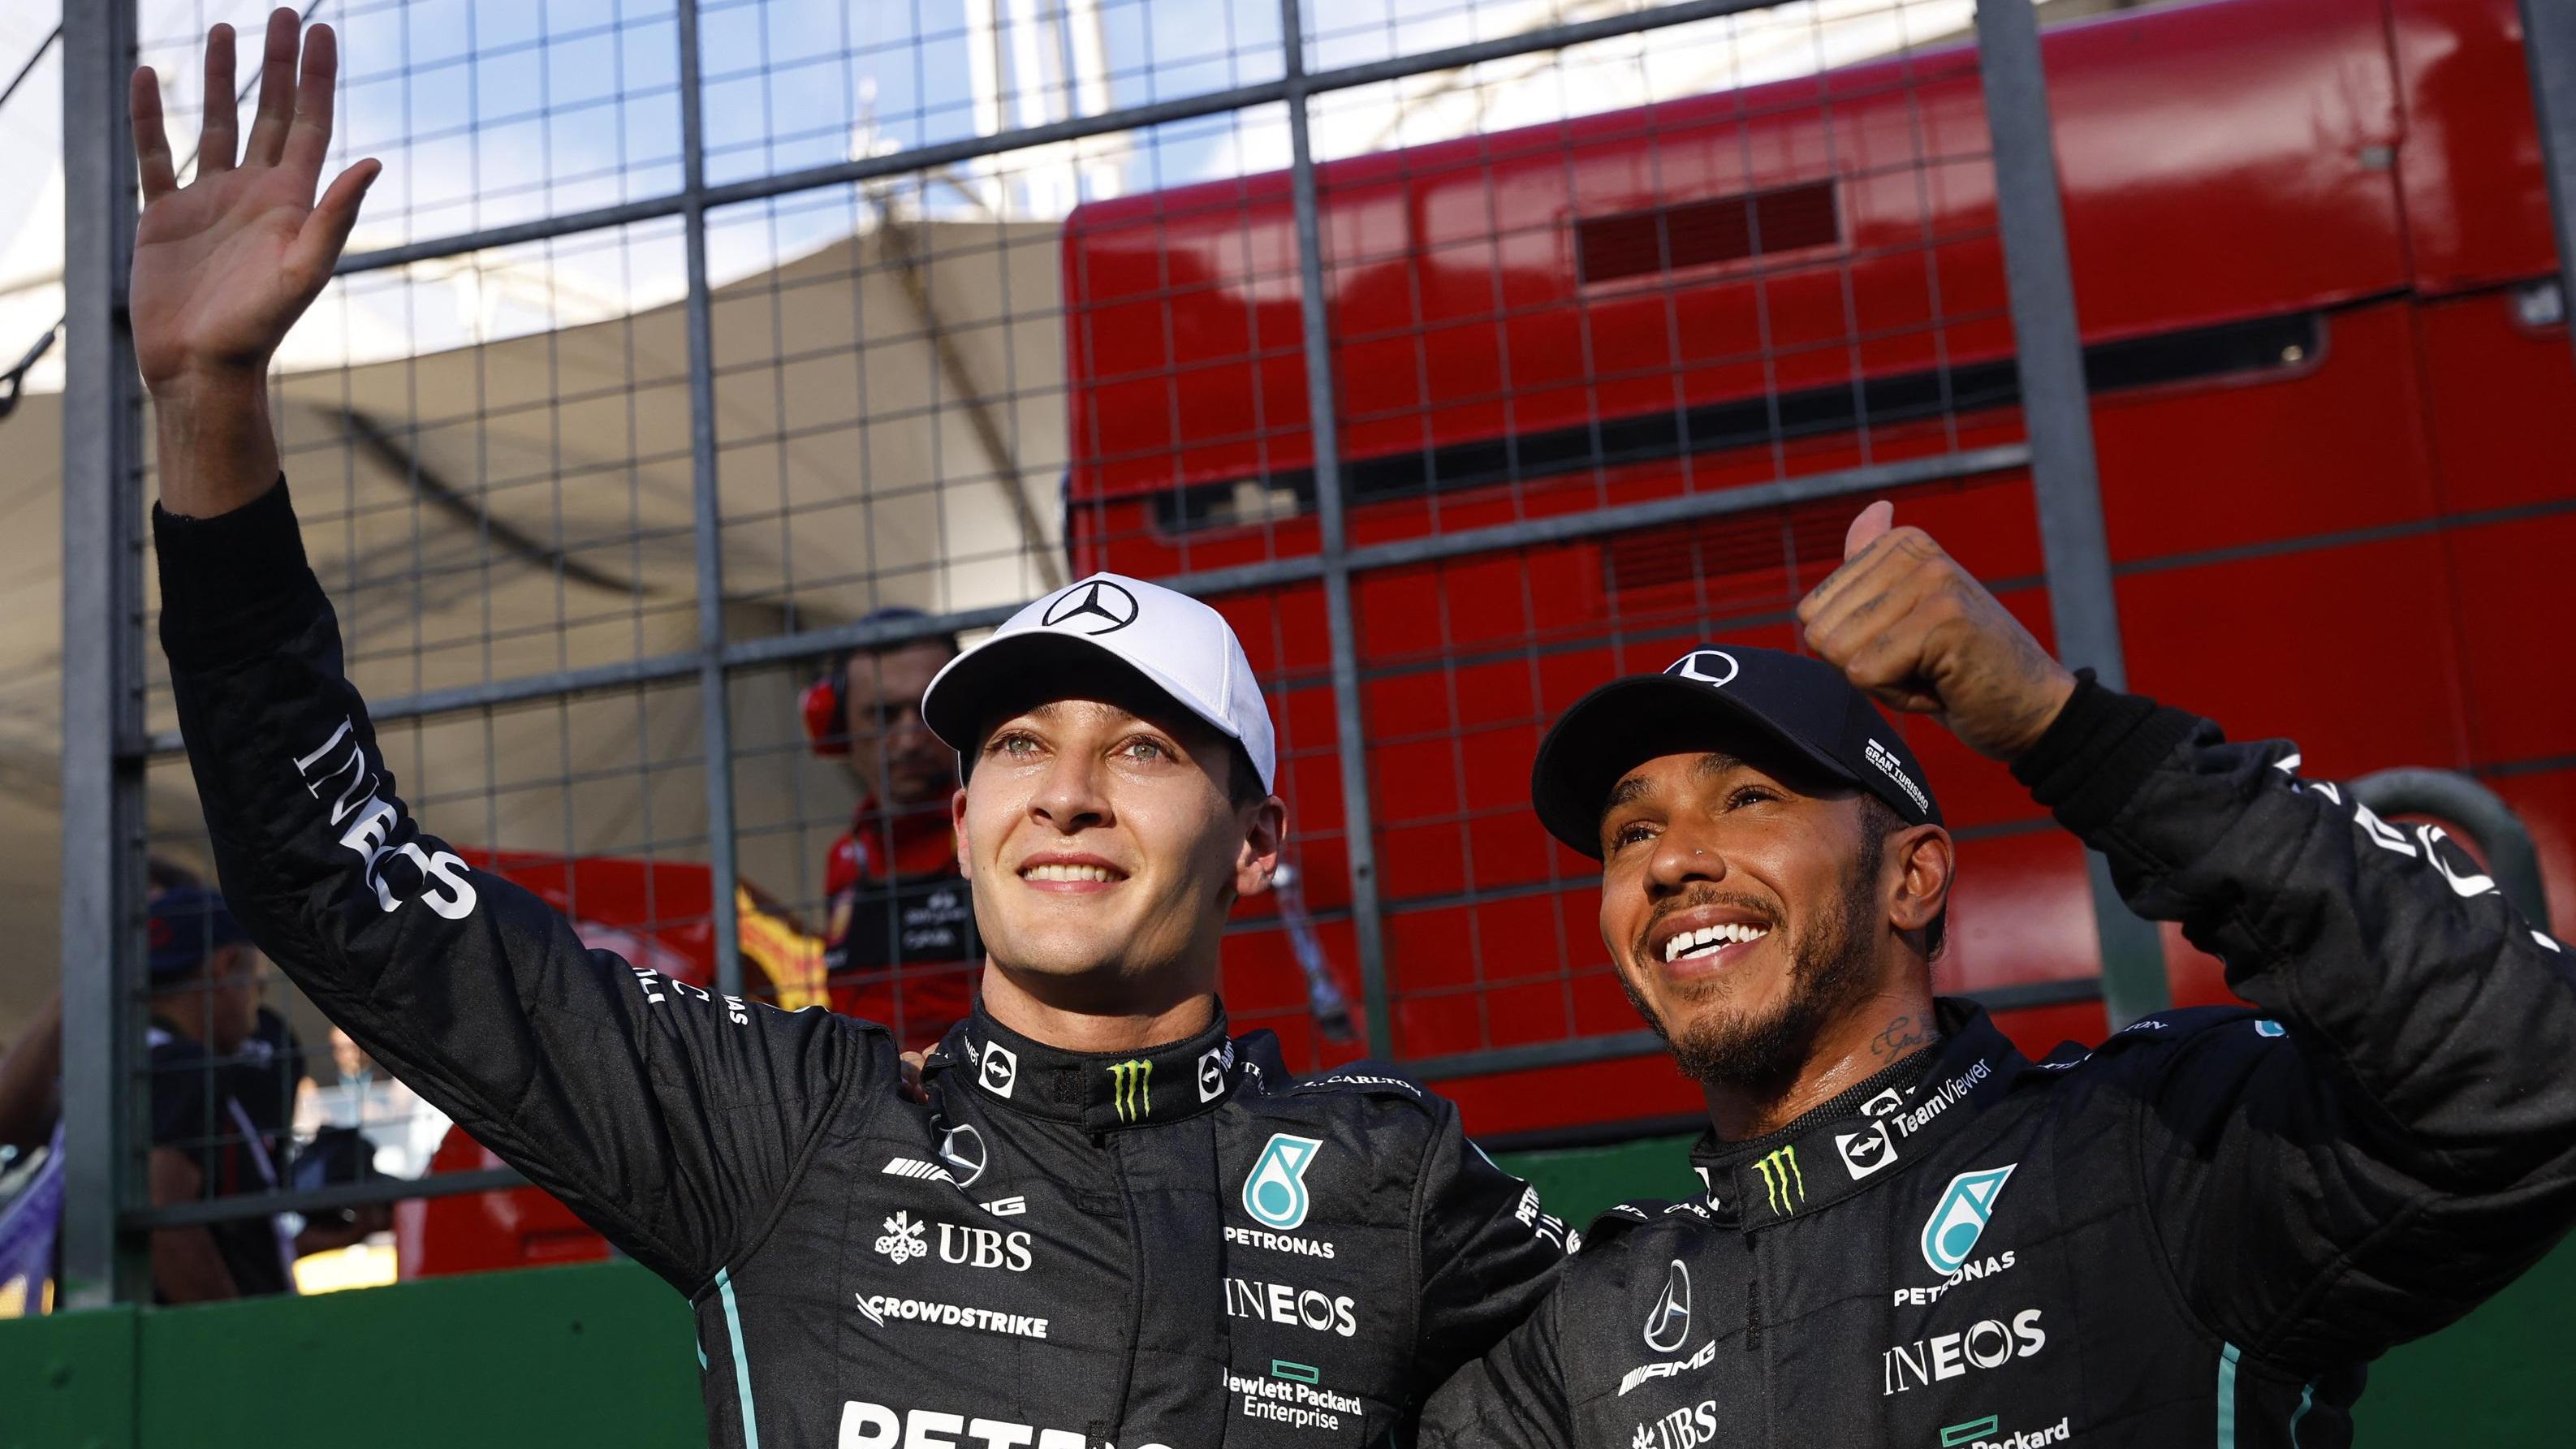 Russell earns maiden victory in sprint to give Mercedes the advantage in Brazil